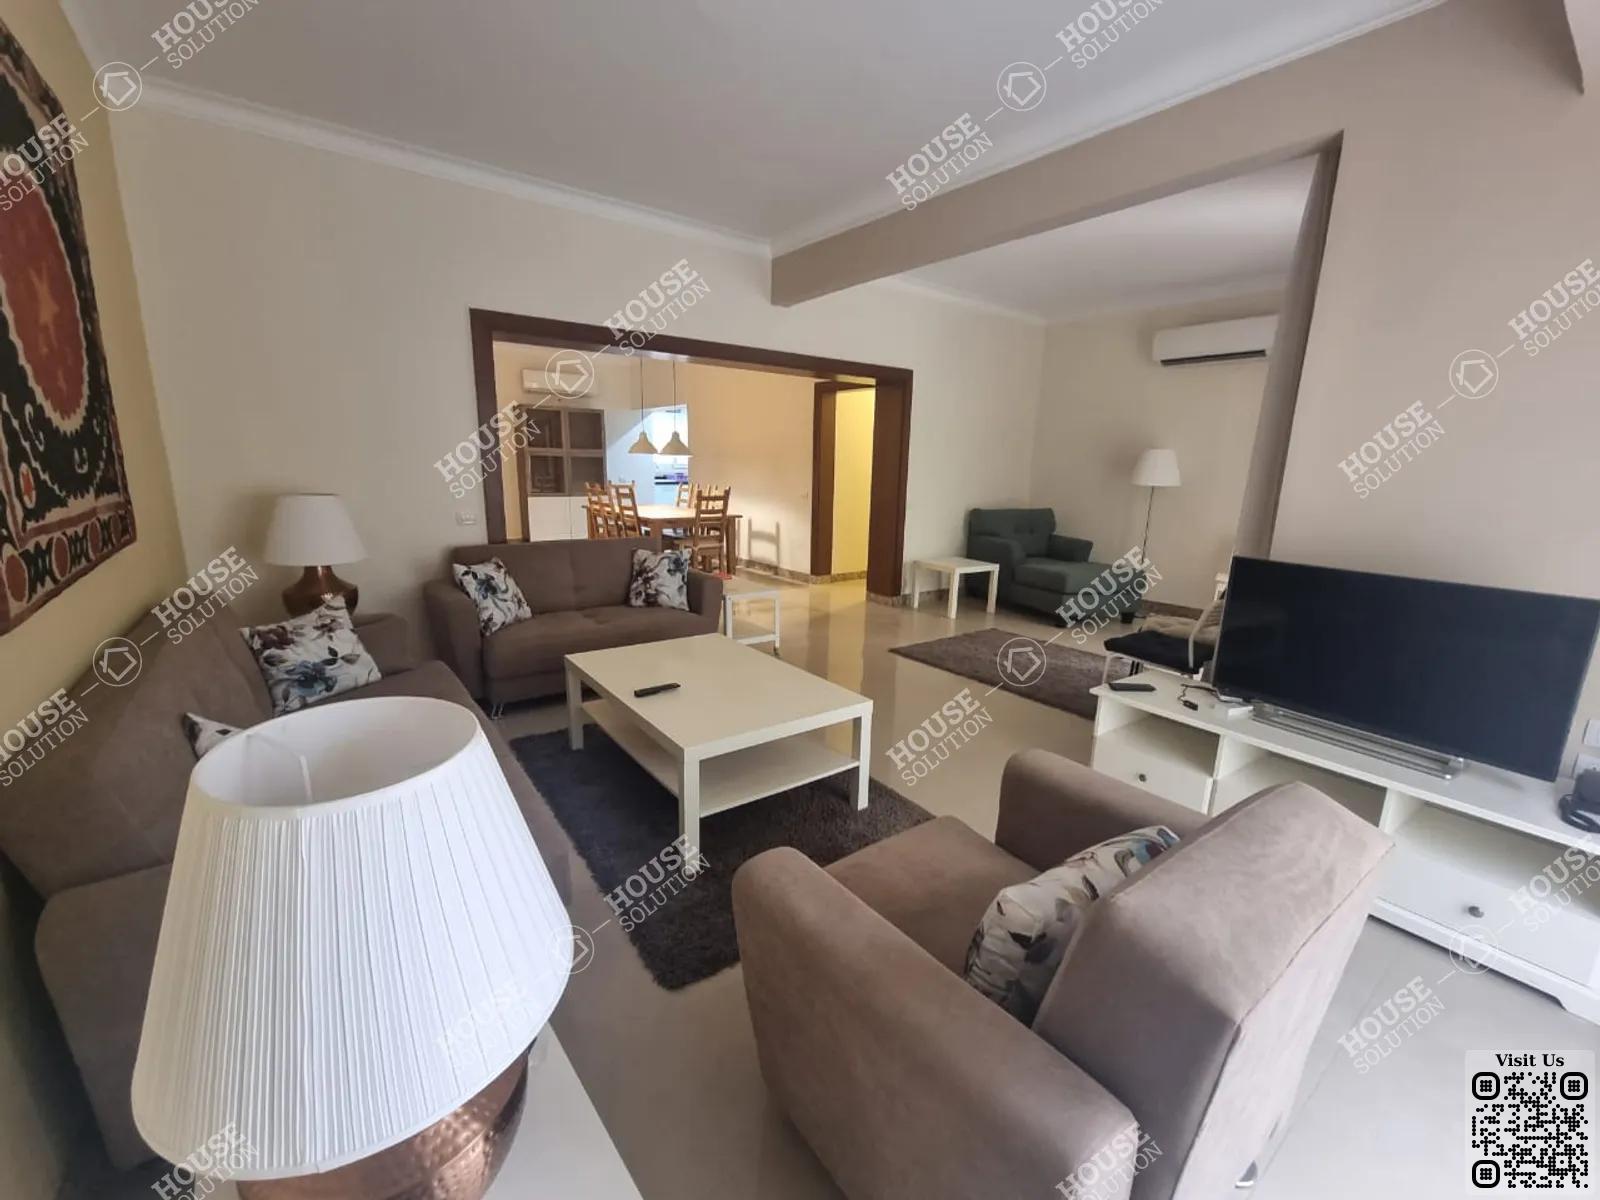 RECEPTION  @ Apartments For Rent In Maadi Maadi Sarayat Area: 130 m² consists of 2 Bedrooms 2 Bathrooms Modern furnished 5 stars #5662-2